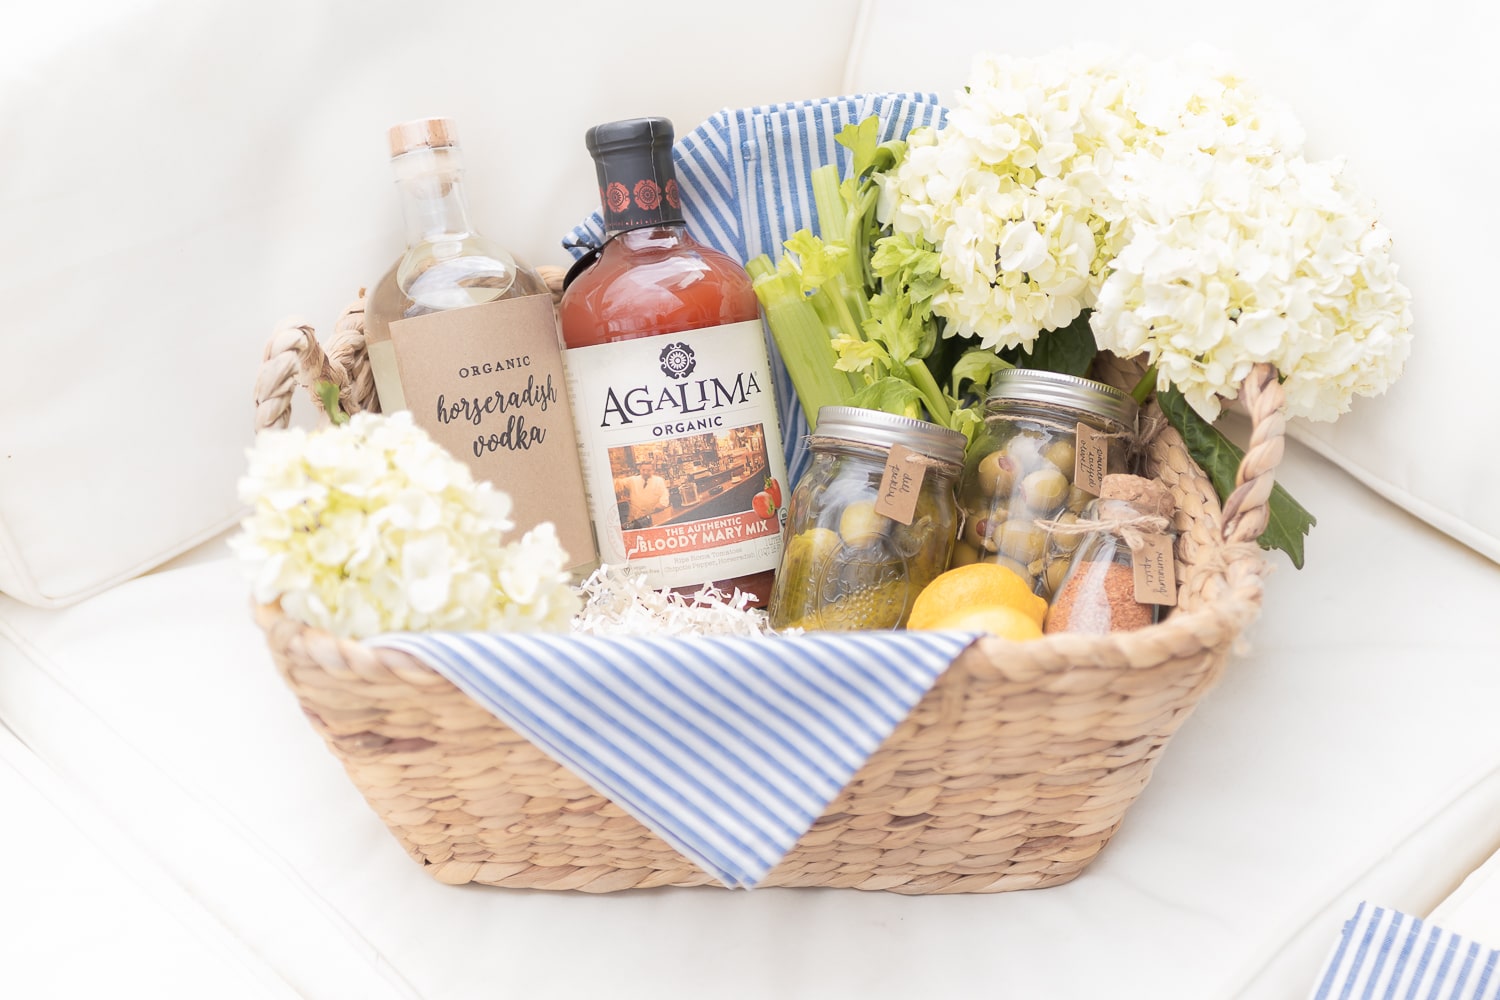 Bloody mary basket filled with horseradish vodka, Agalima Organic bloody mary mix and a variety of bloody mary garnishes by blogger Stephanie Ziajka on Diary of a Debutante